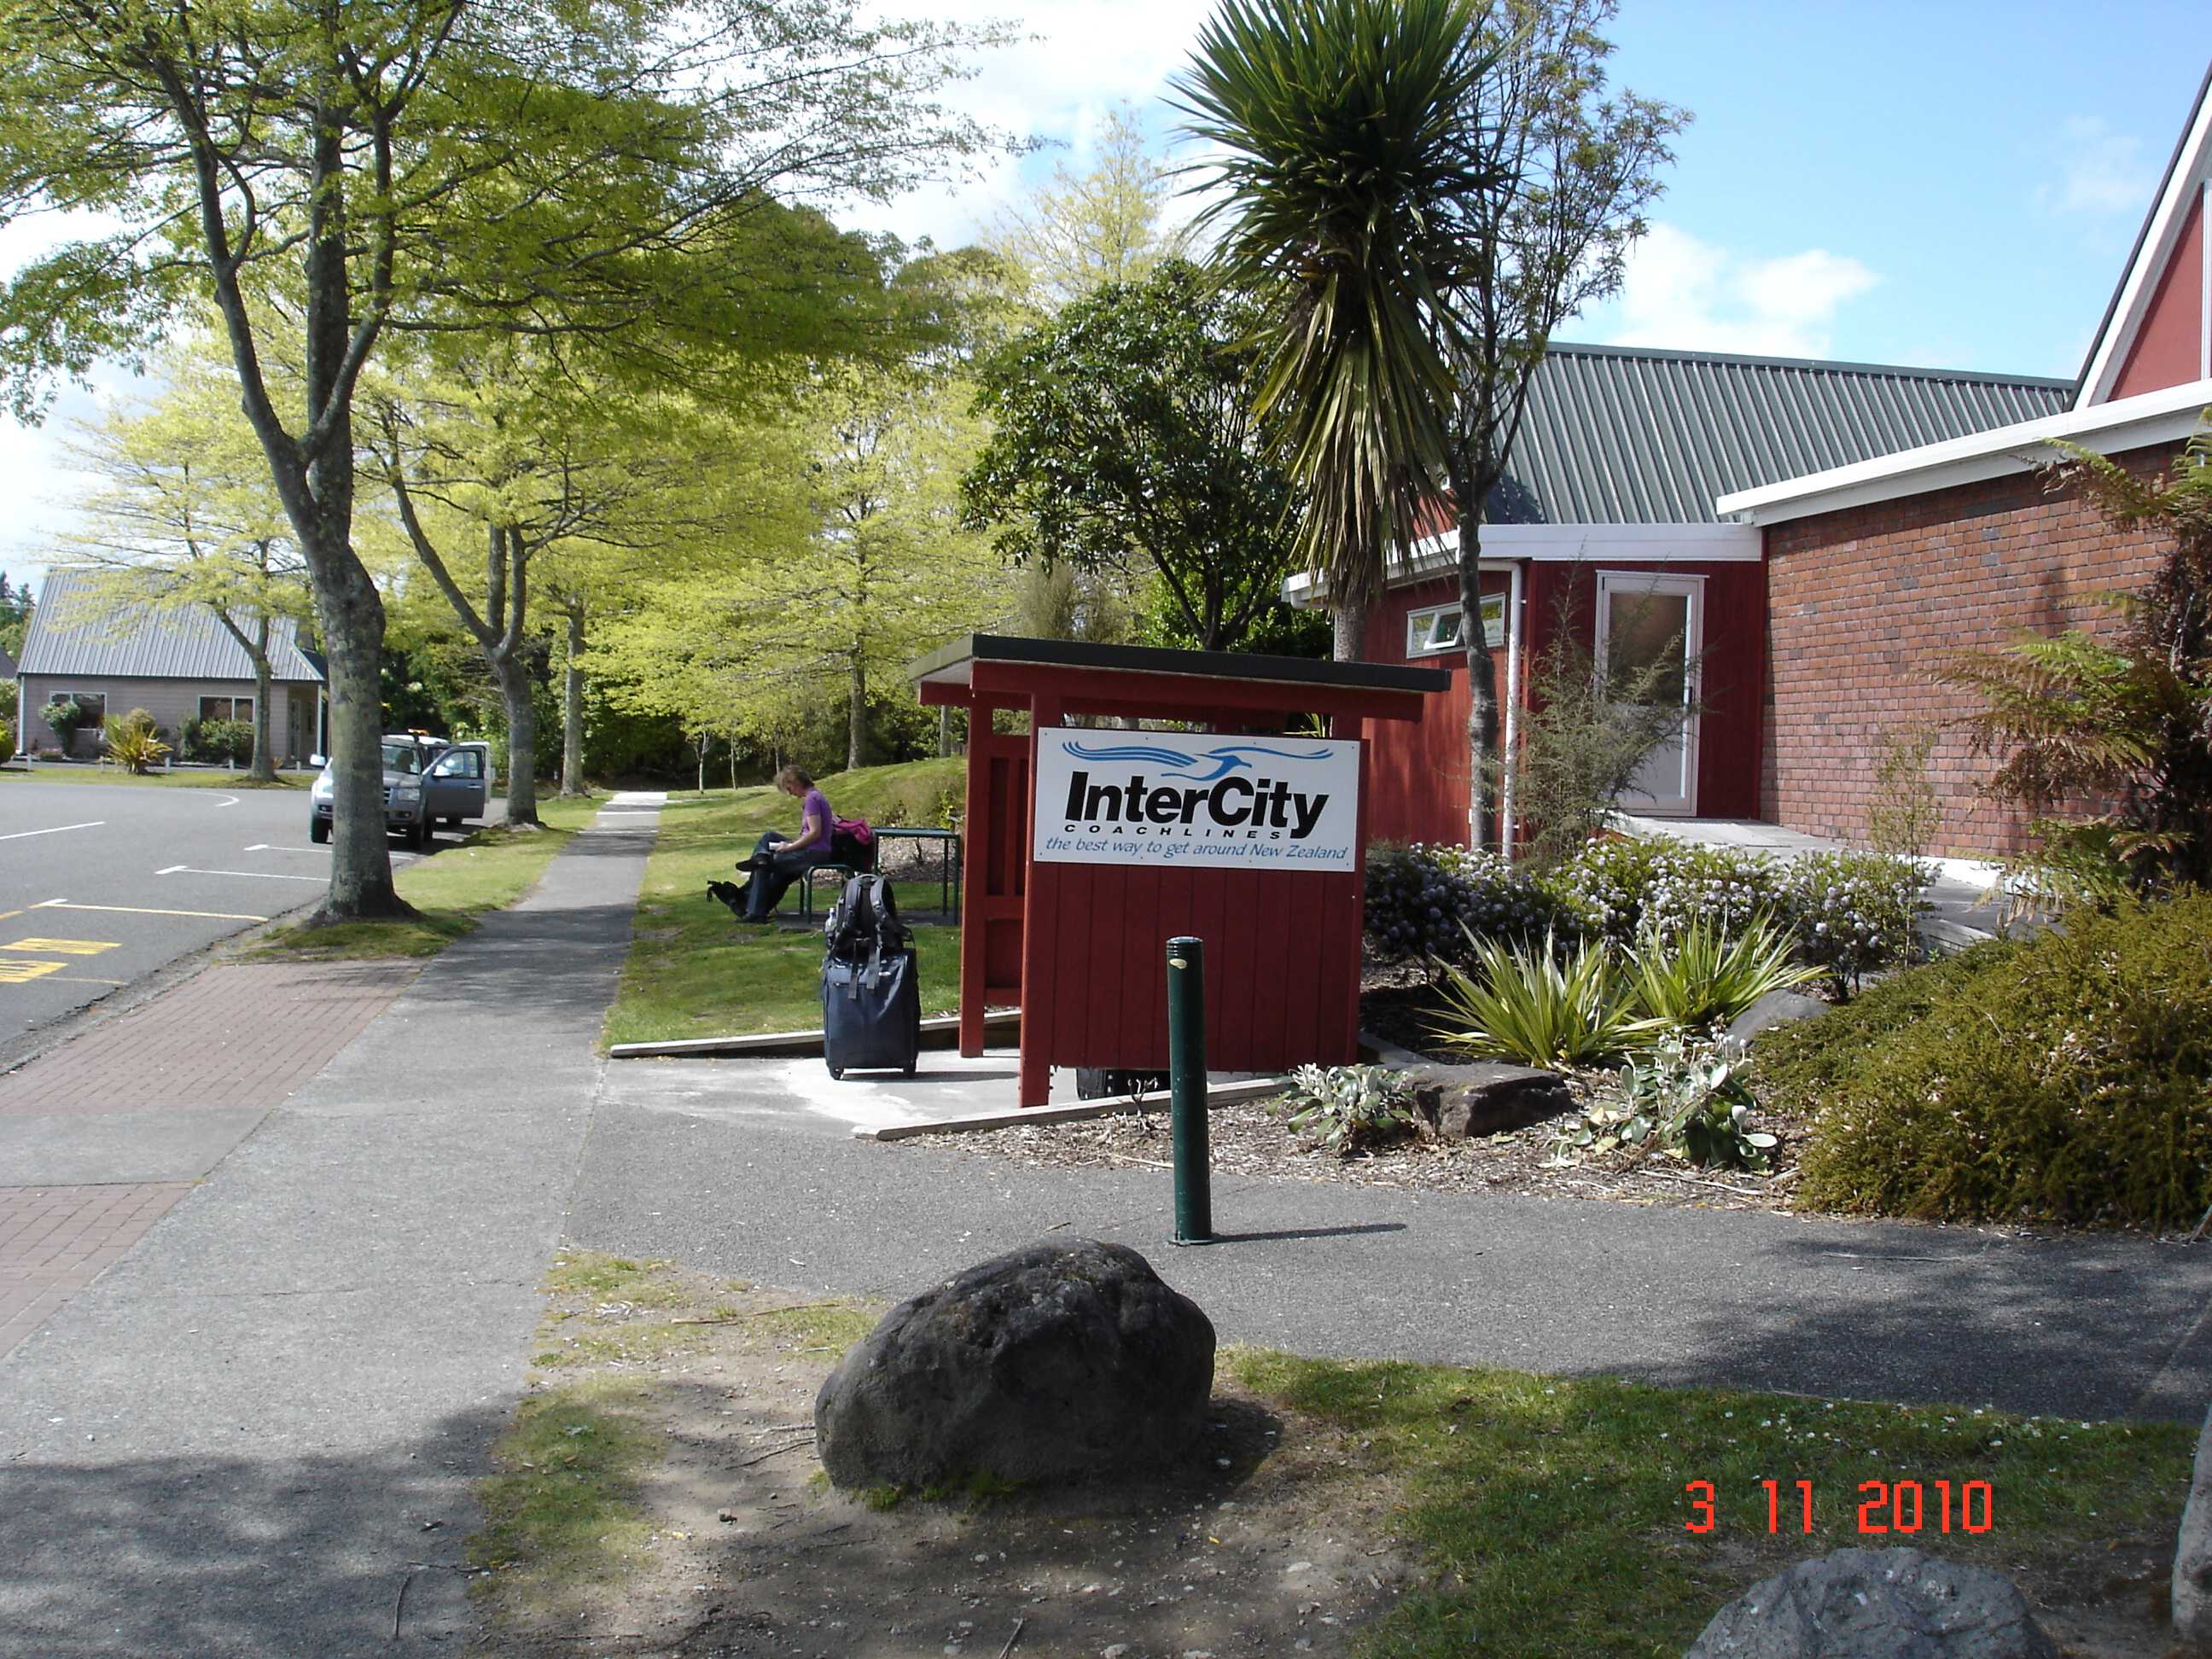 A bus stop in Turangi